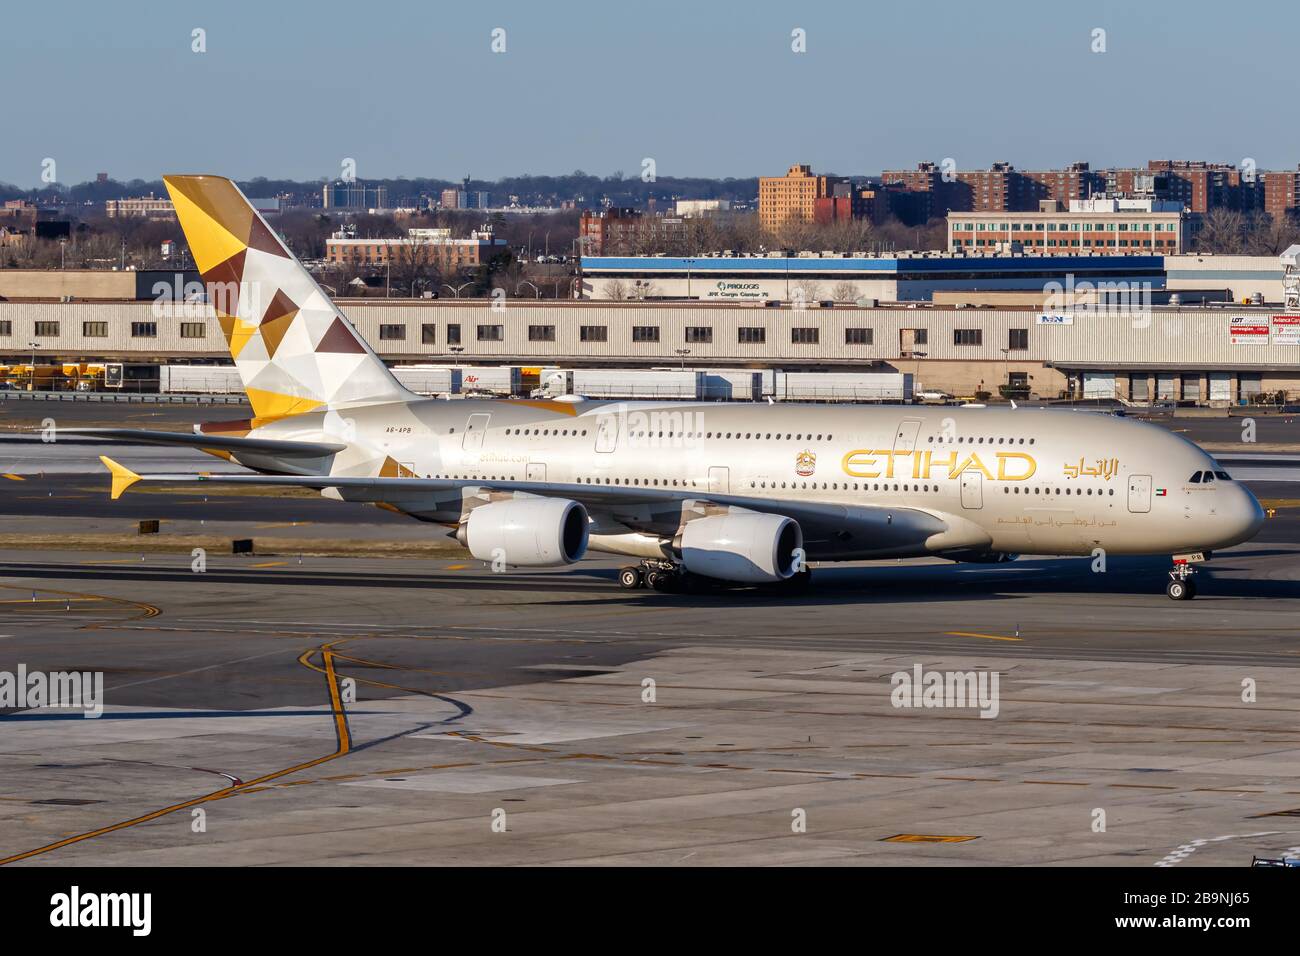 New York City, New York – March 1, 2020: Etihad Airways Airbus A380-800 airplane at New York JFK airport (JFK) in New York. Airbus is a European aircr Stock Photo